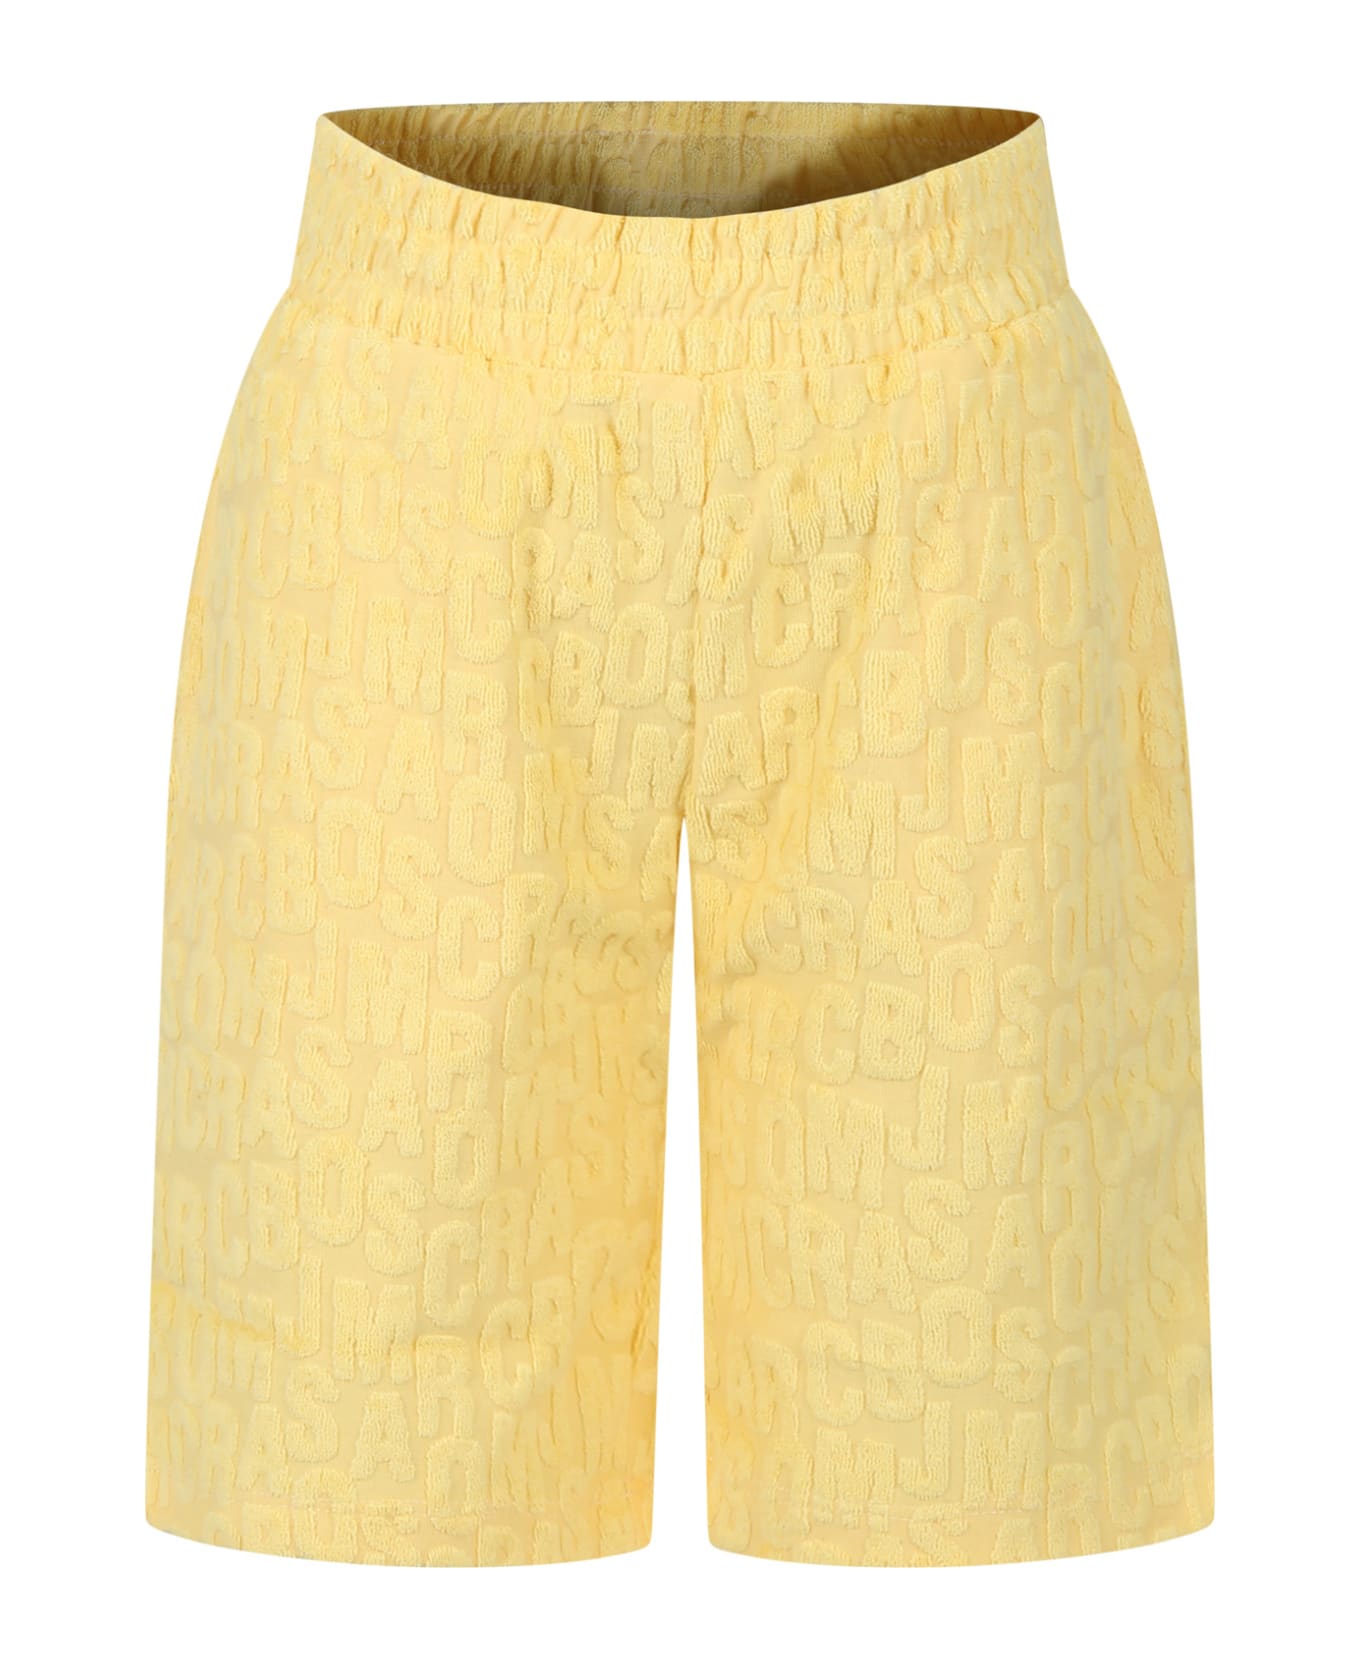 Marc Jacobs Yellow Shorts For Kids With Logo - Yellow